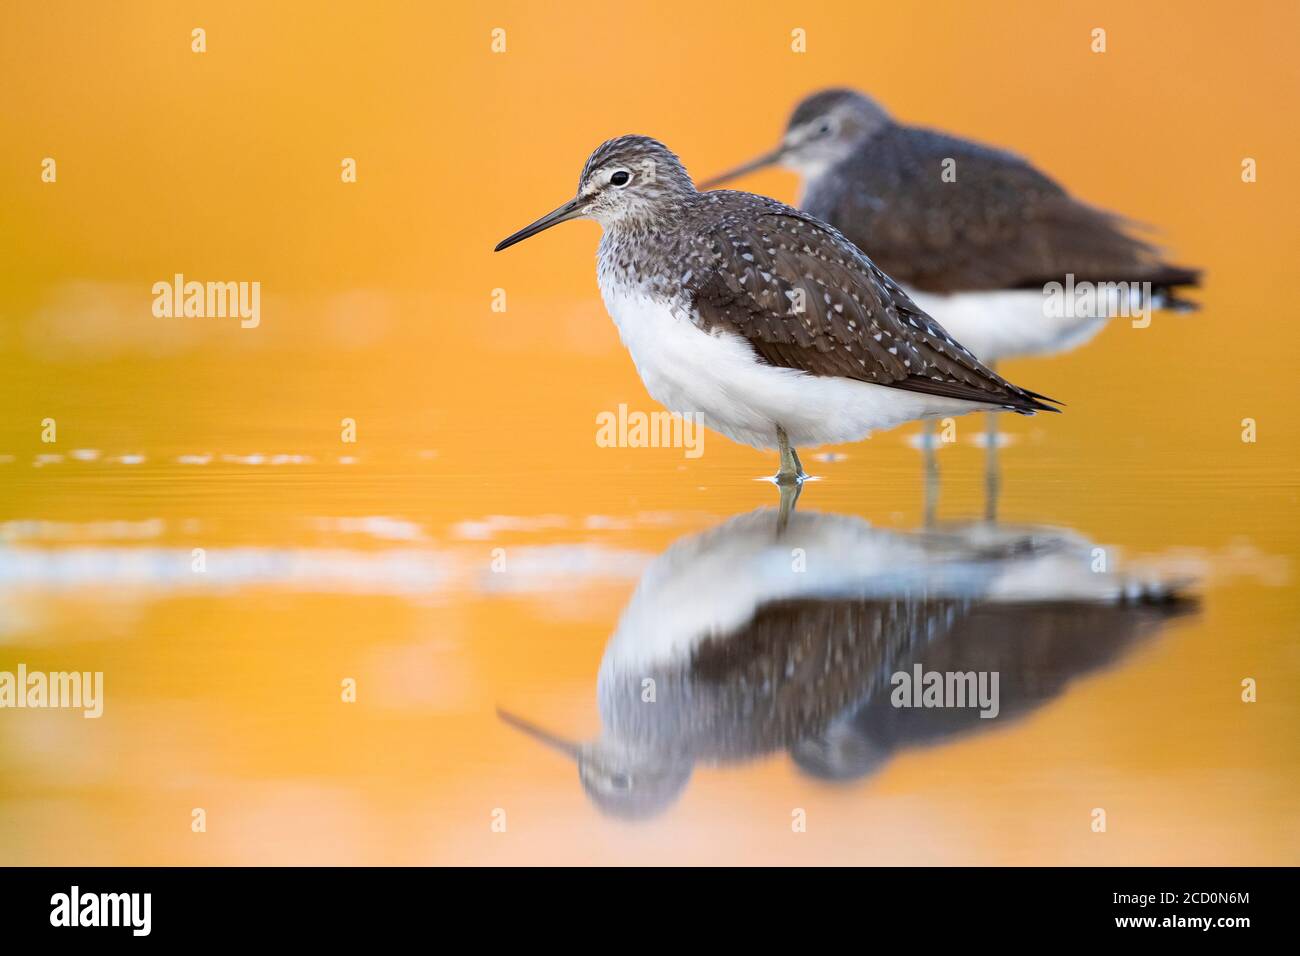 Green Sandpiper (Tringa ochropus), two individuals standing in shallow water at sunset in Italy. Stock Photo